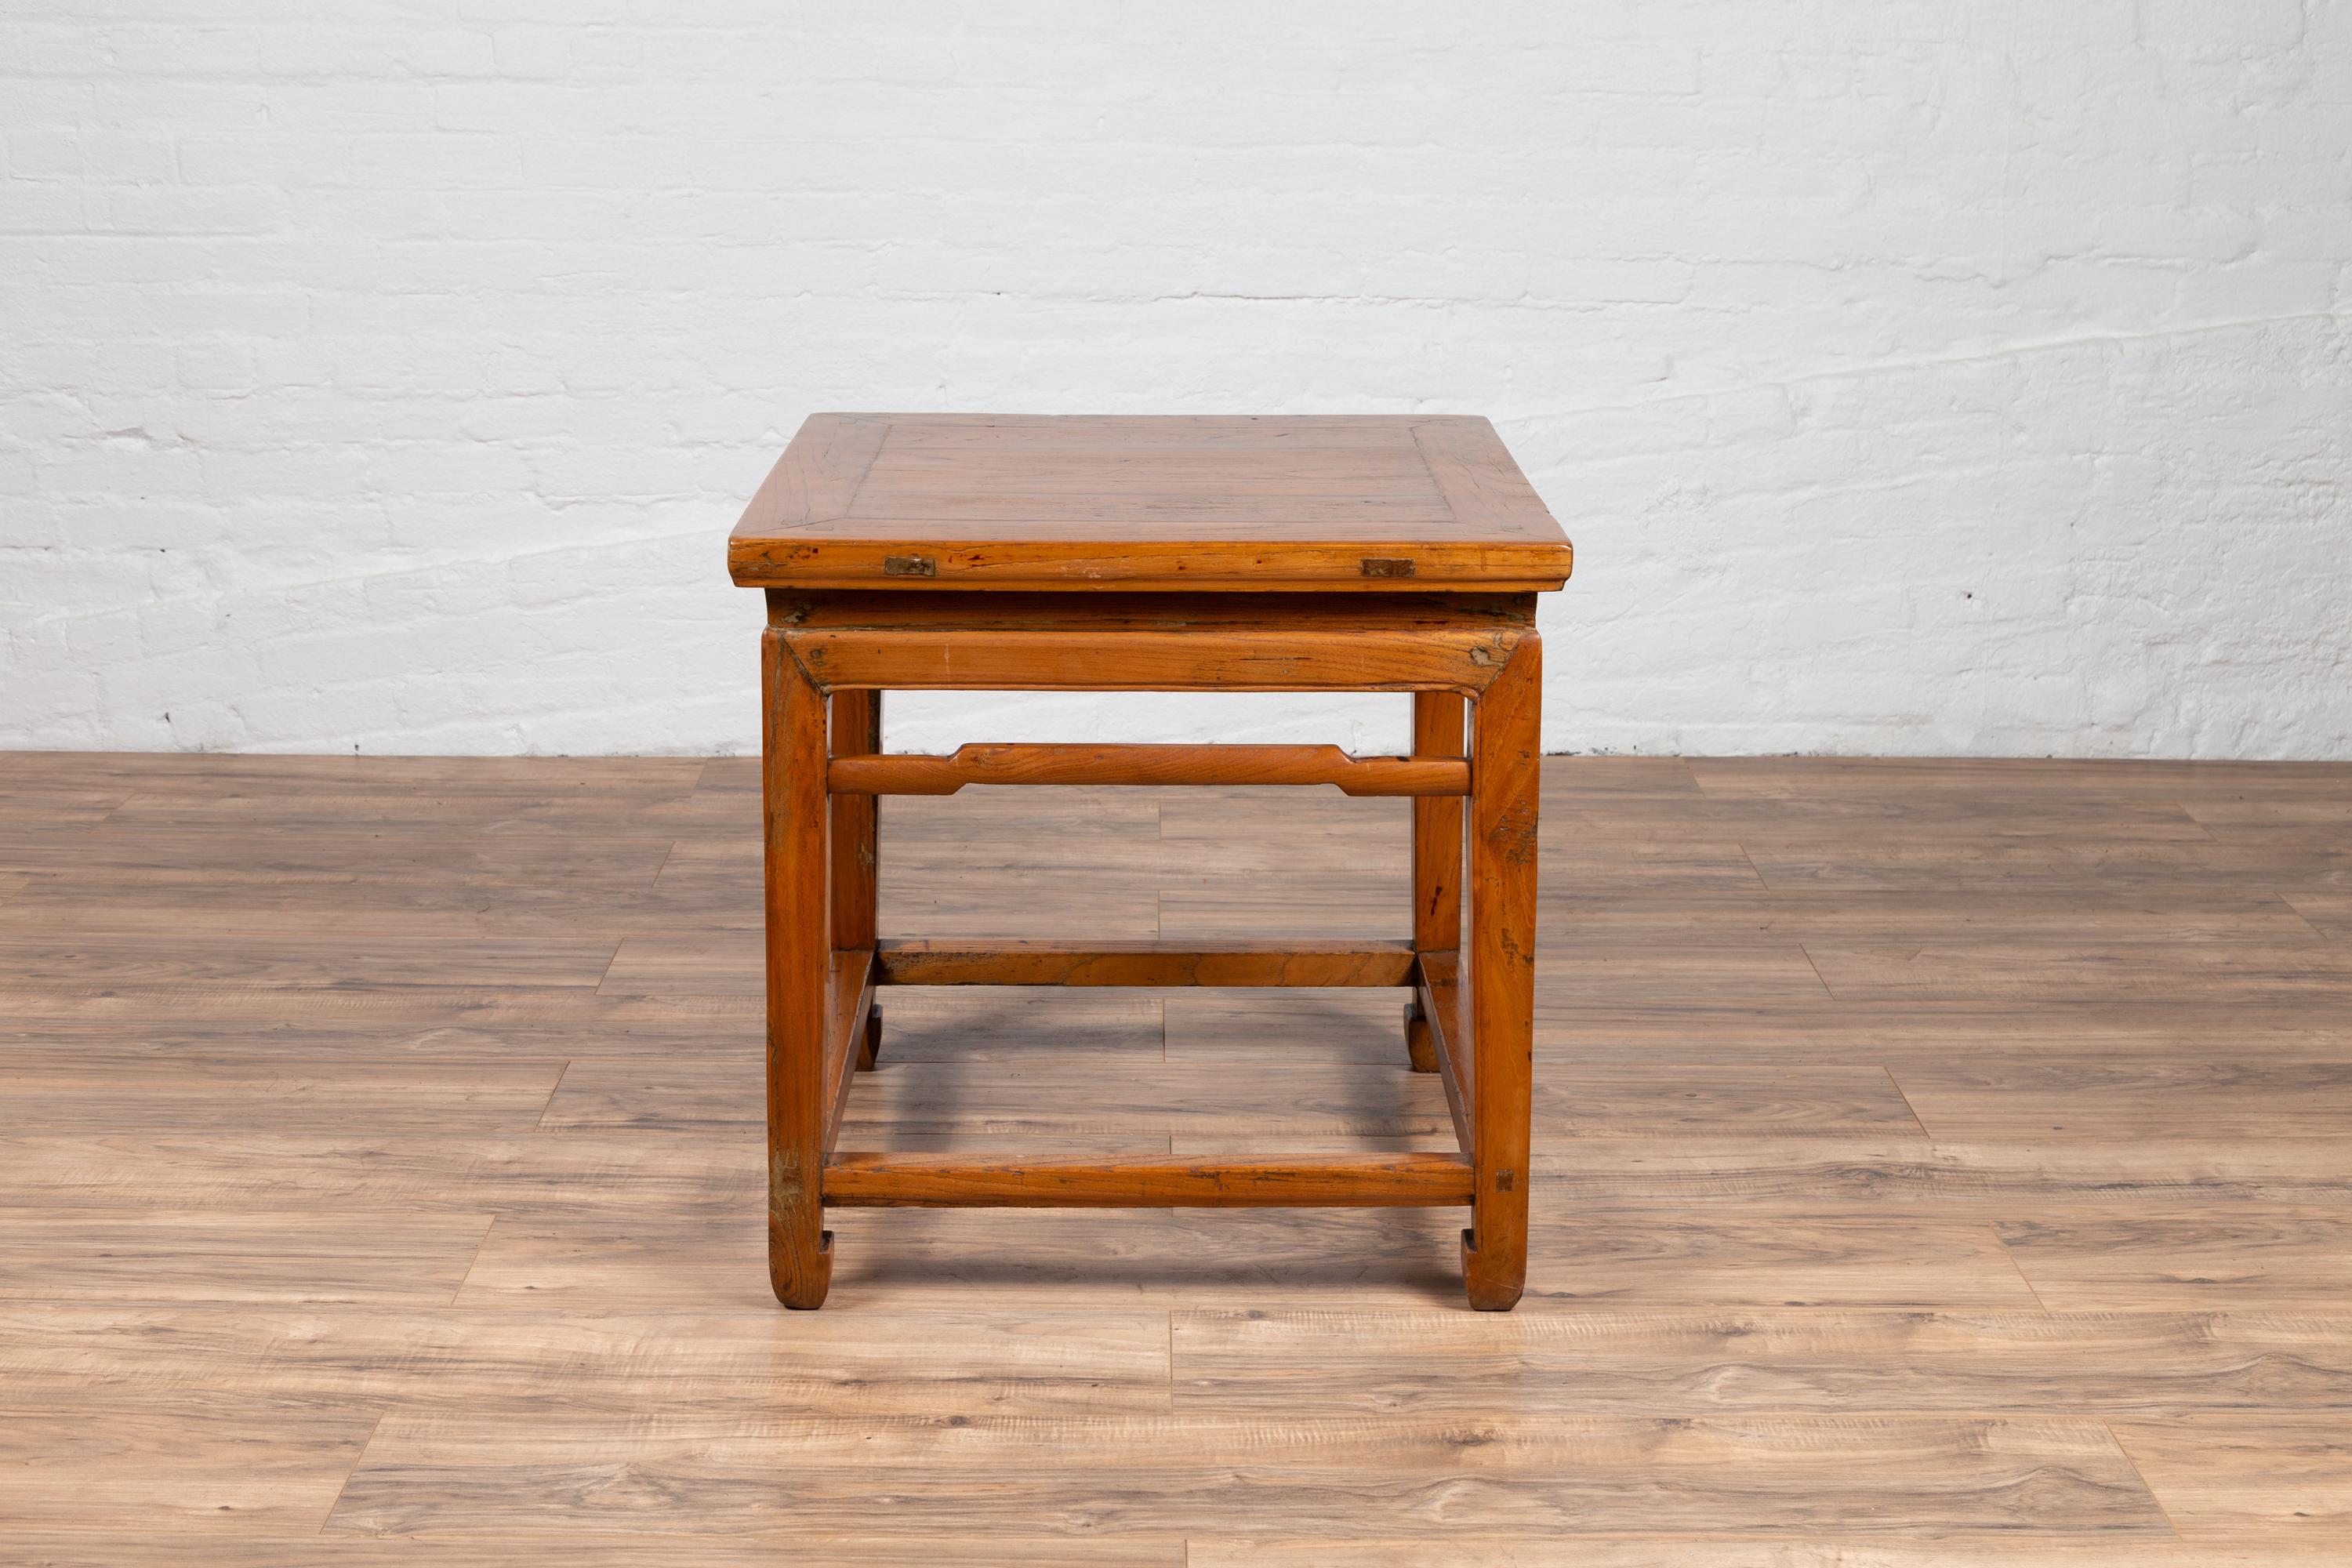 A Chinese Ming dynasty style waisted elmwood side table from the early 20th century, with humpbacked stretchers and horse-hoof feet. Born in China during the early years of the 20th century, this charming side table features a square top with